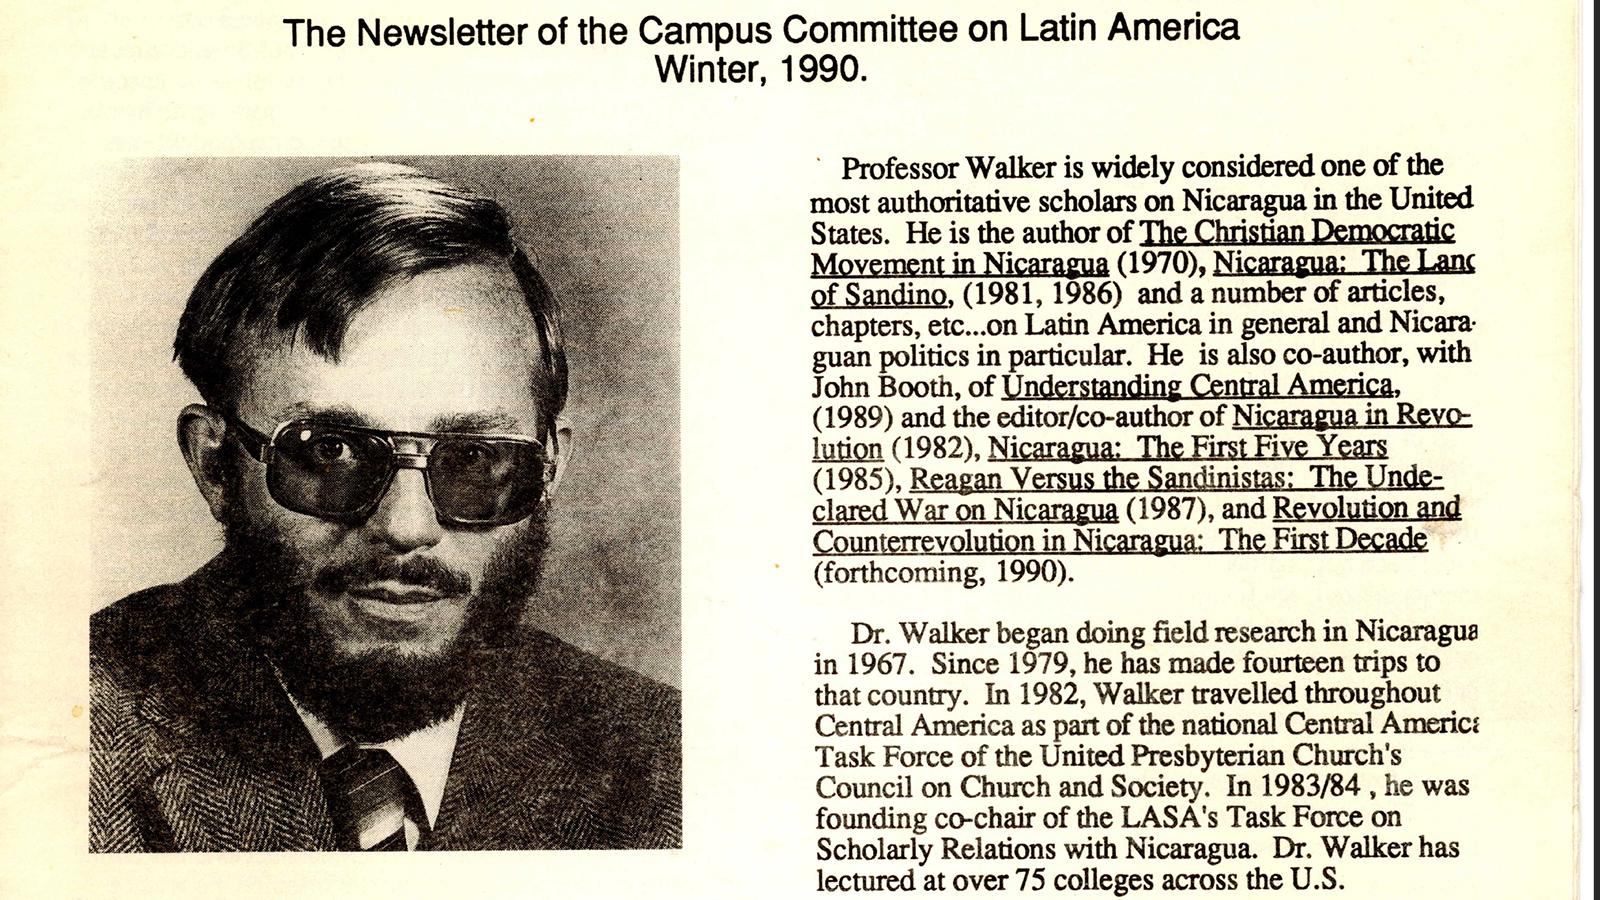 Campus Committee on Latin America newsletter, Winter 1990